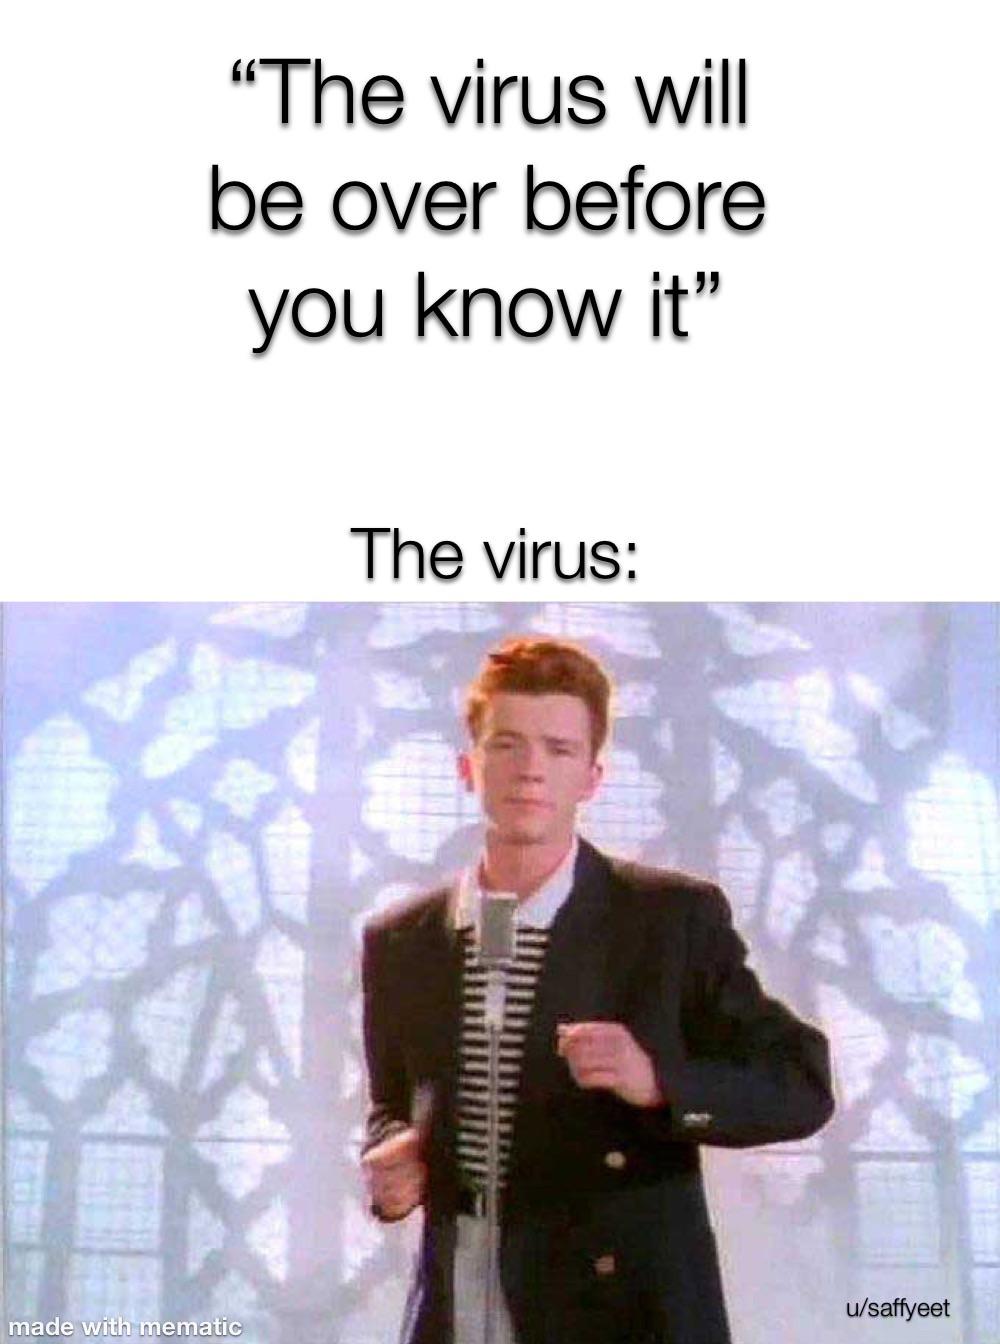 rick roll - "The virus will be over before you know it" The virus usaffyeet made with mematic